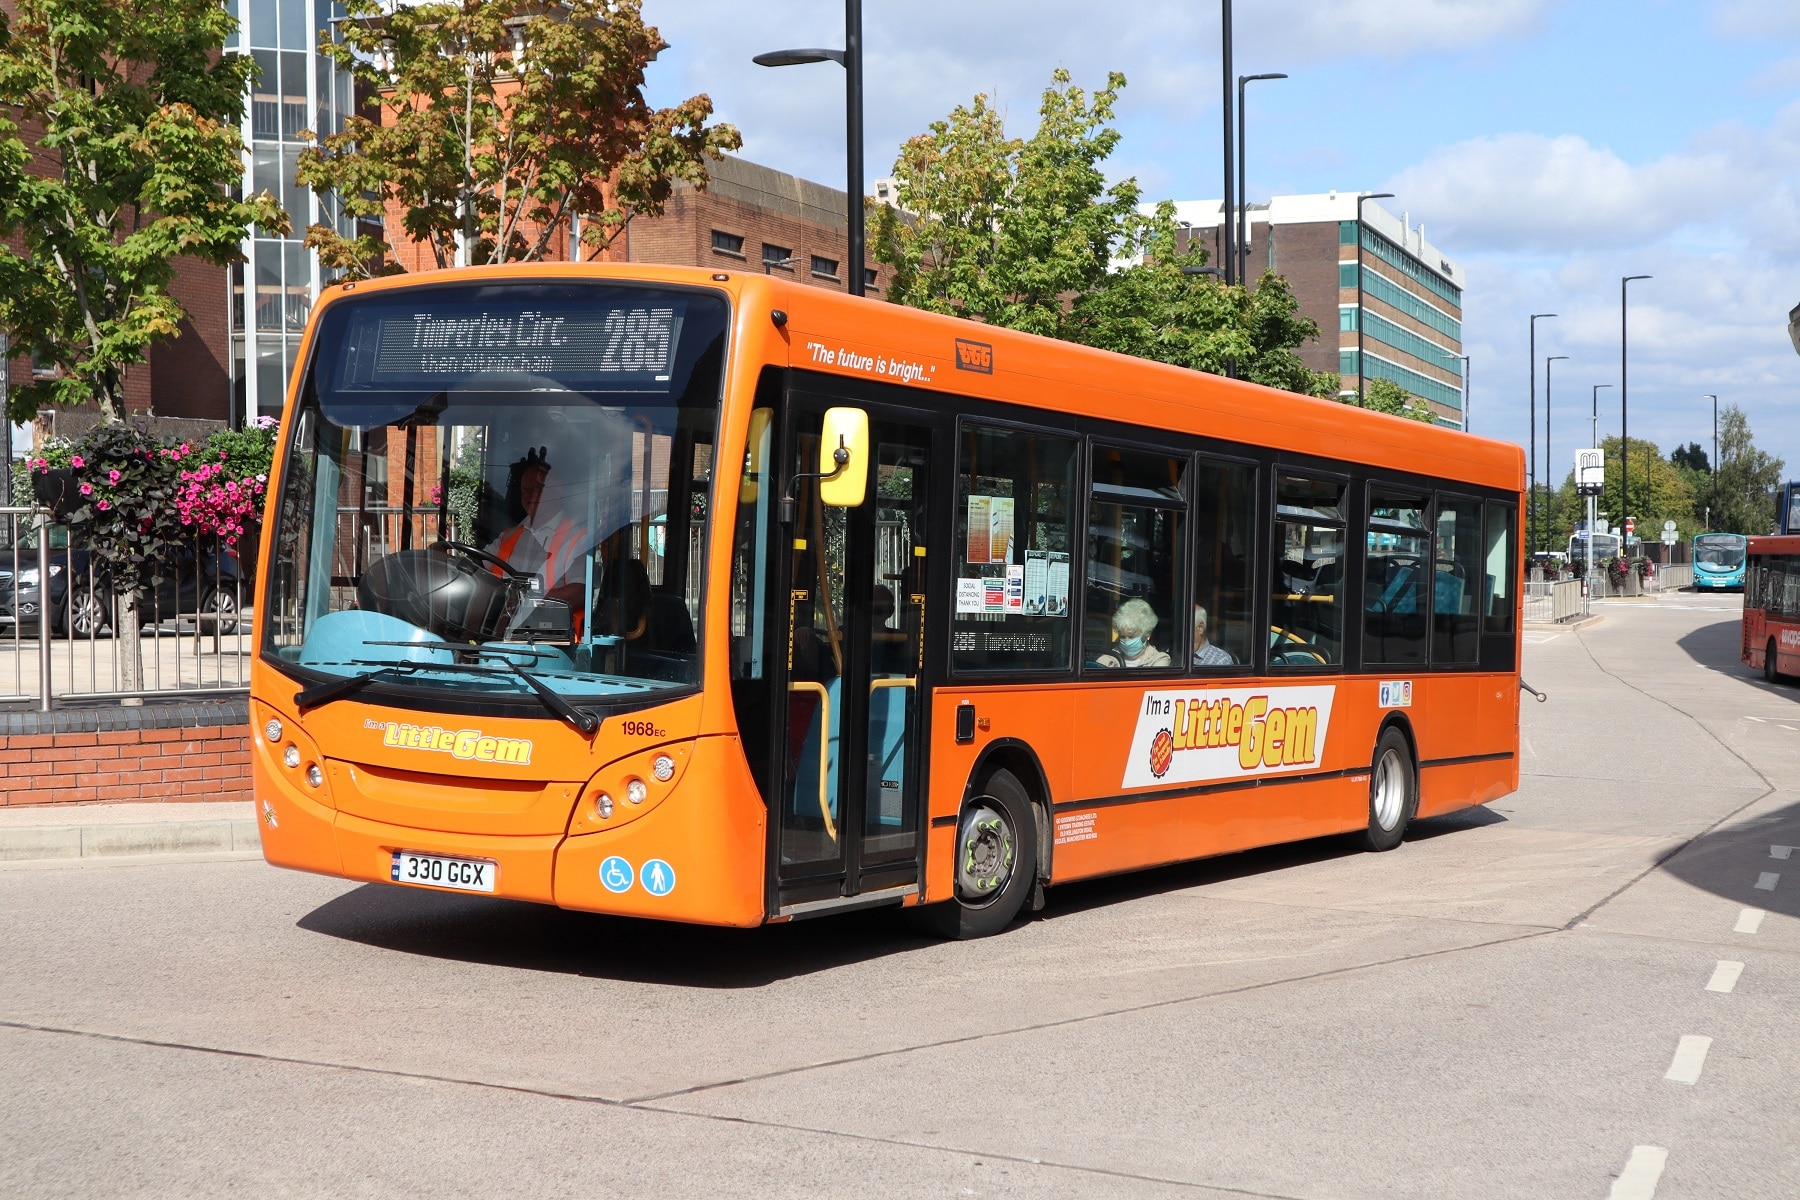 BSIPs in England should benefit all bus passengers, says CPT's Graham Vidler